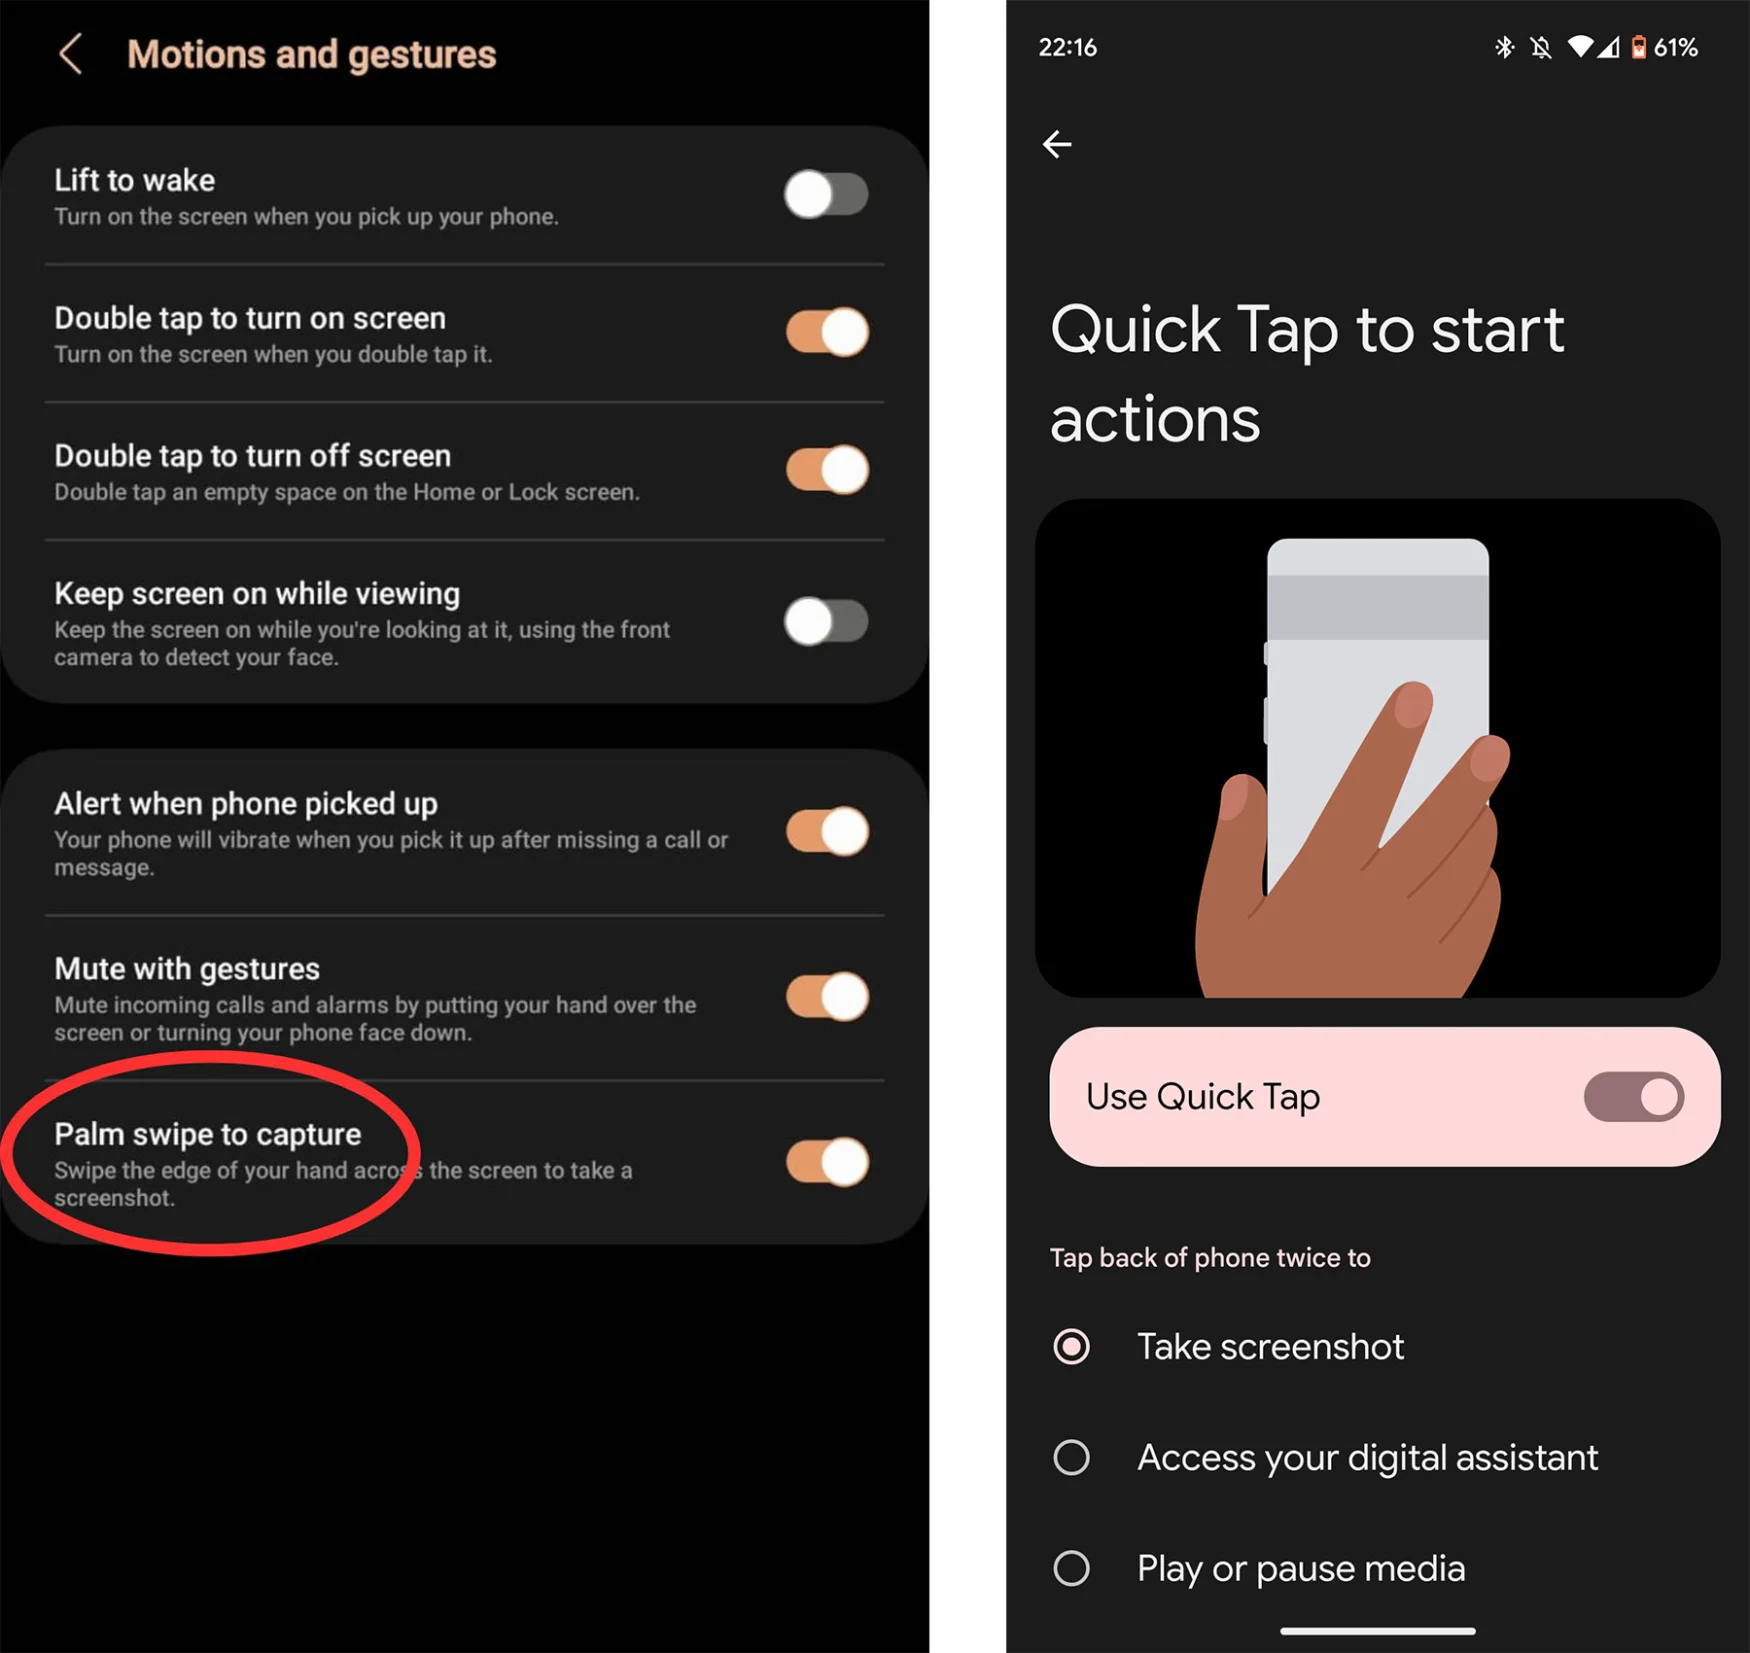 How to take a screenshot on an Android device